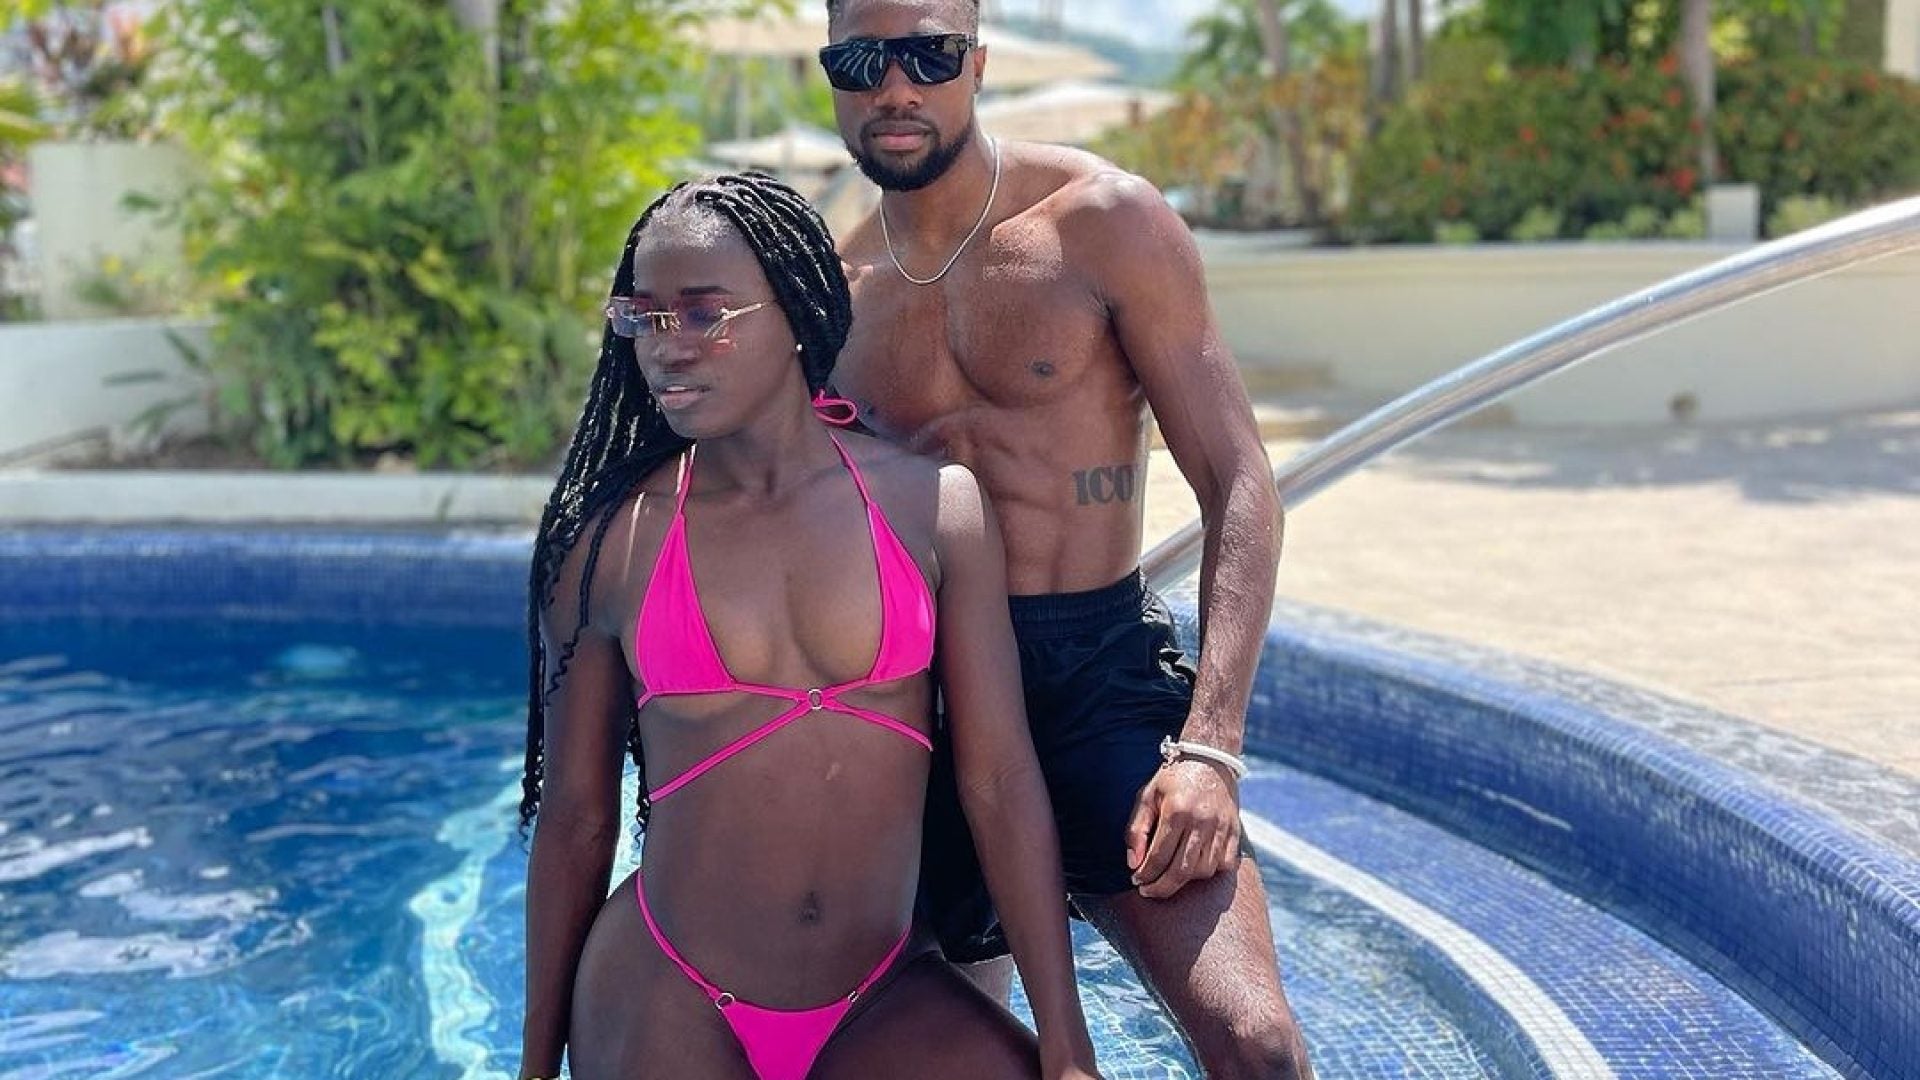 Track Star Noah Lyles, World's Fastest Man, Is Winning Off The Track With Girlfriend Junelle Bromfield